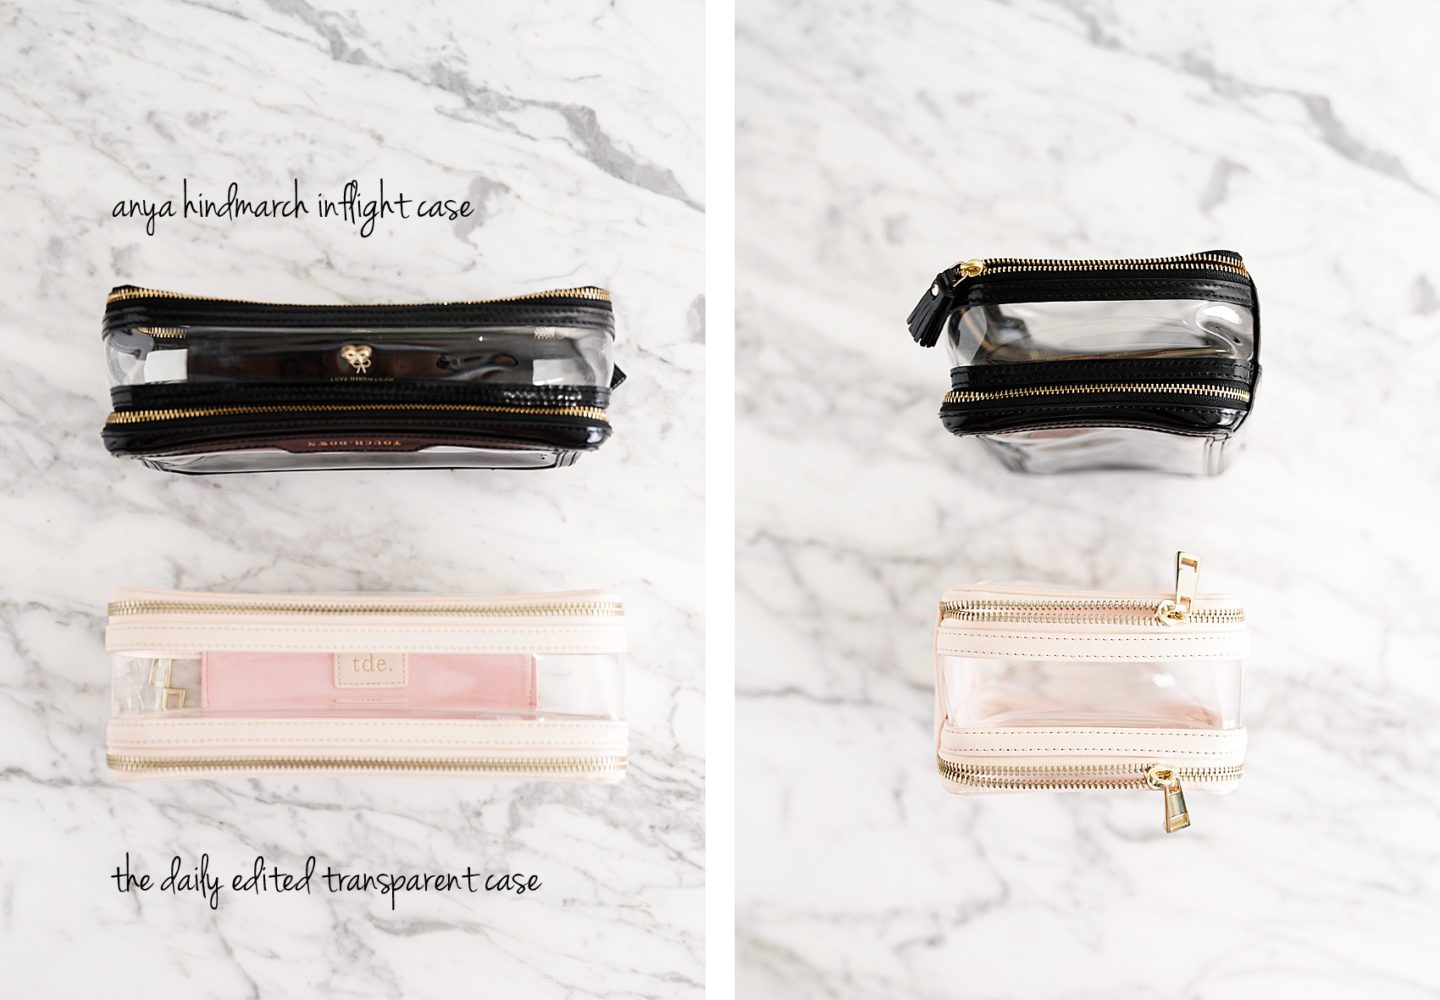 The Daily Edited Transparent Cosmetic Case vs Anya Hindmarch Inflight Travel Case